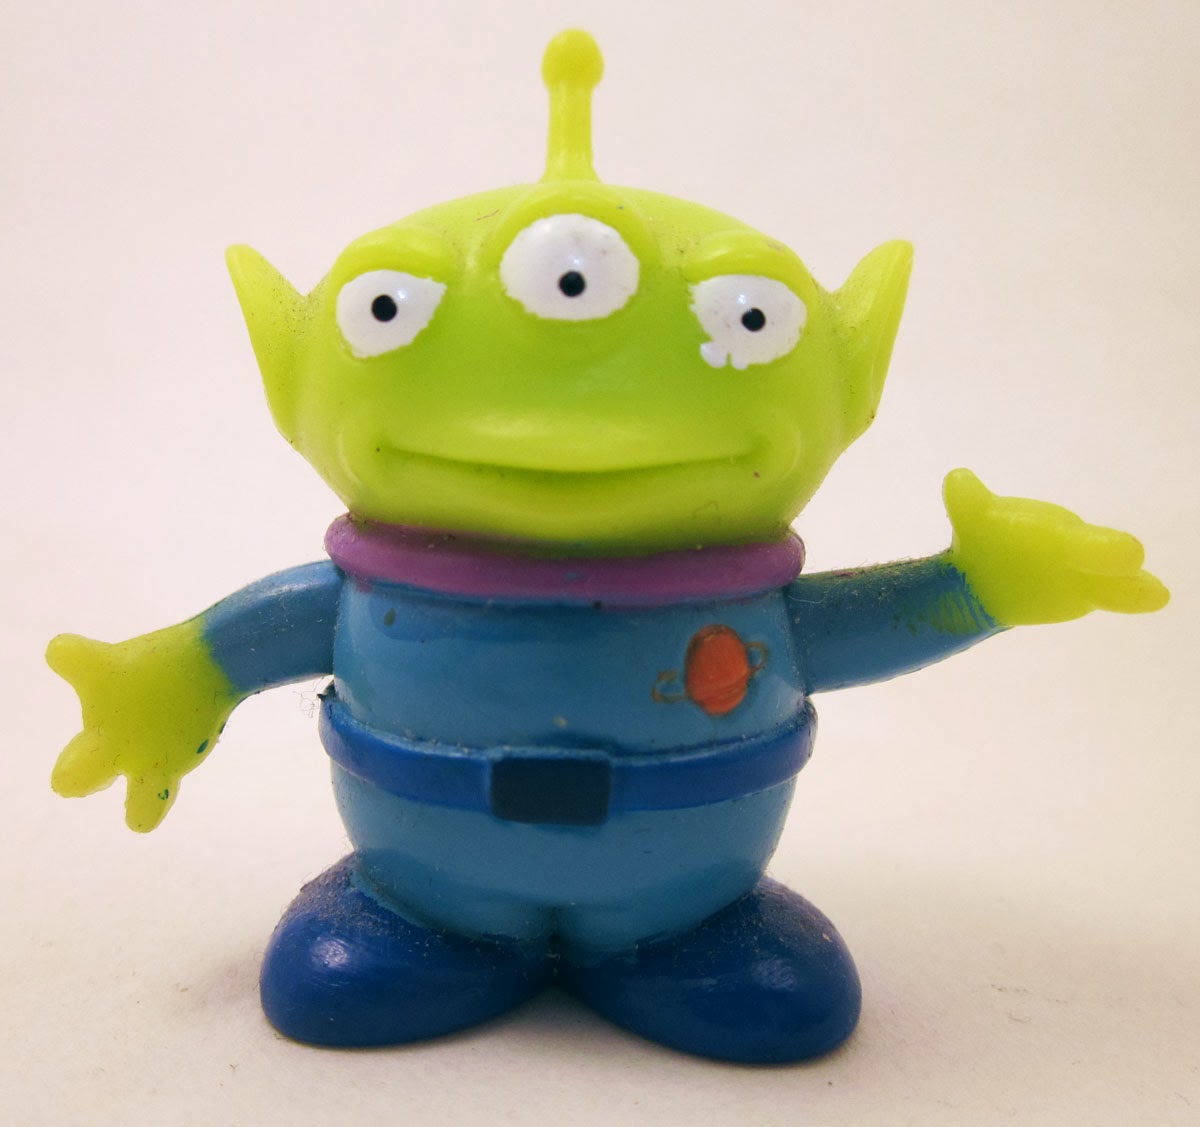 Things of Plastic: 'Toy Story' Aliens